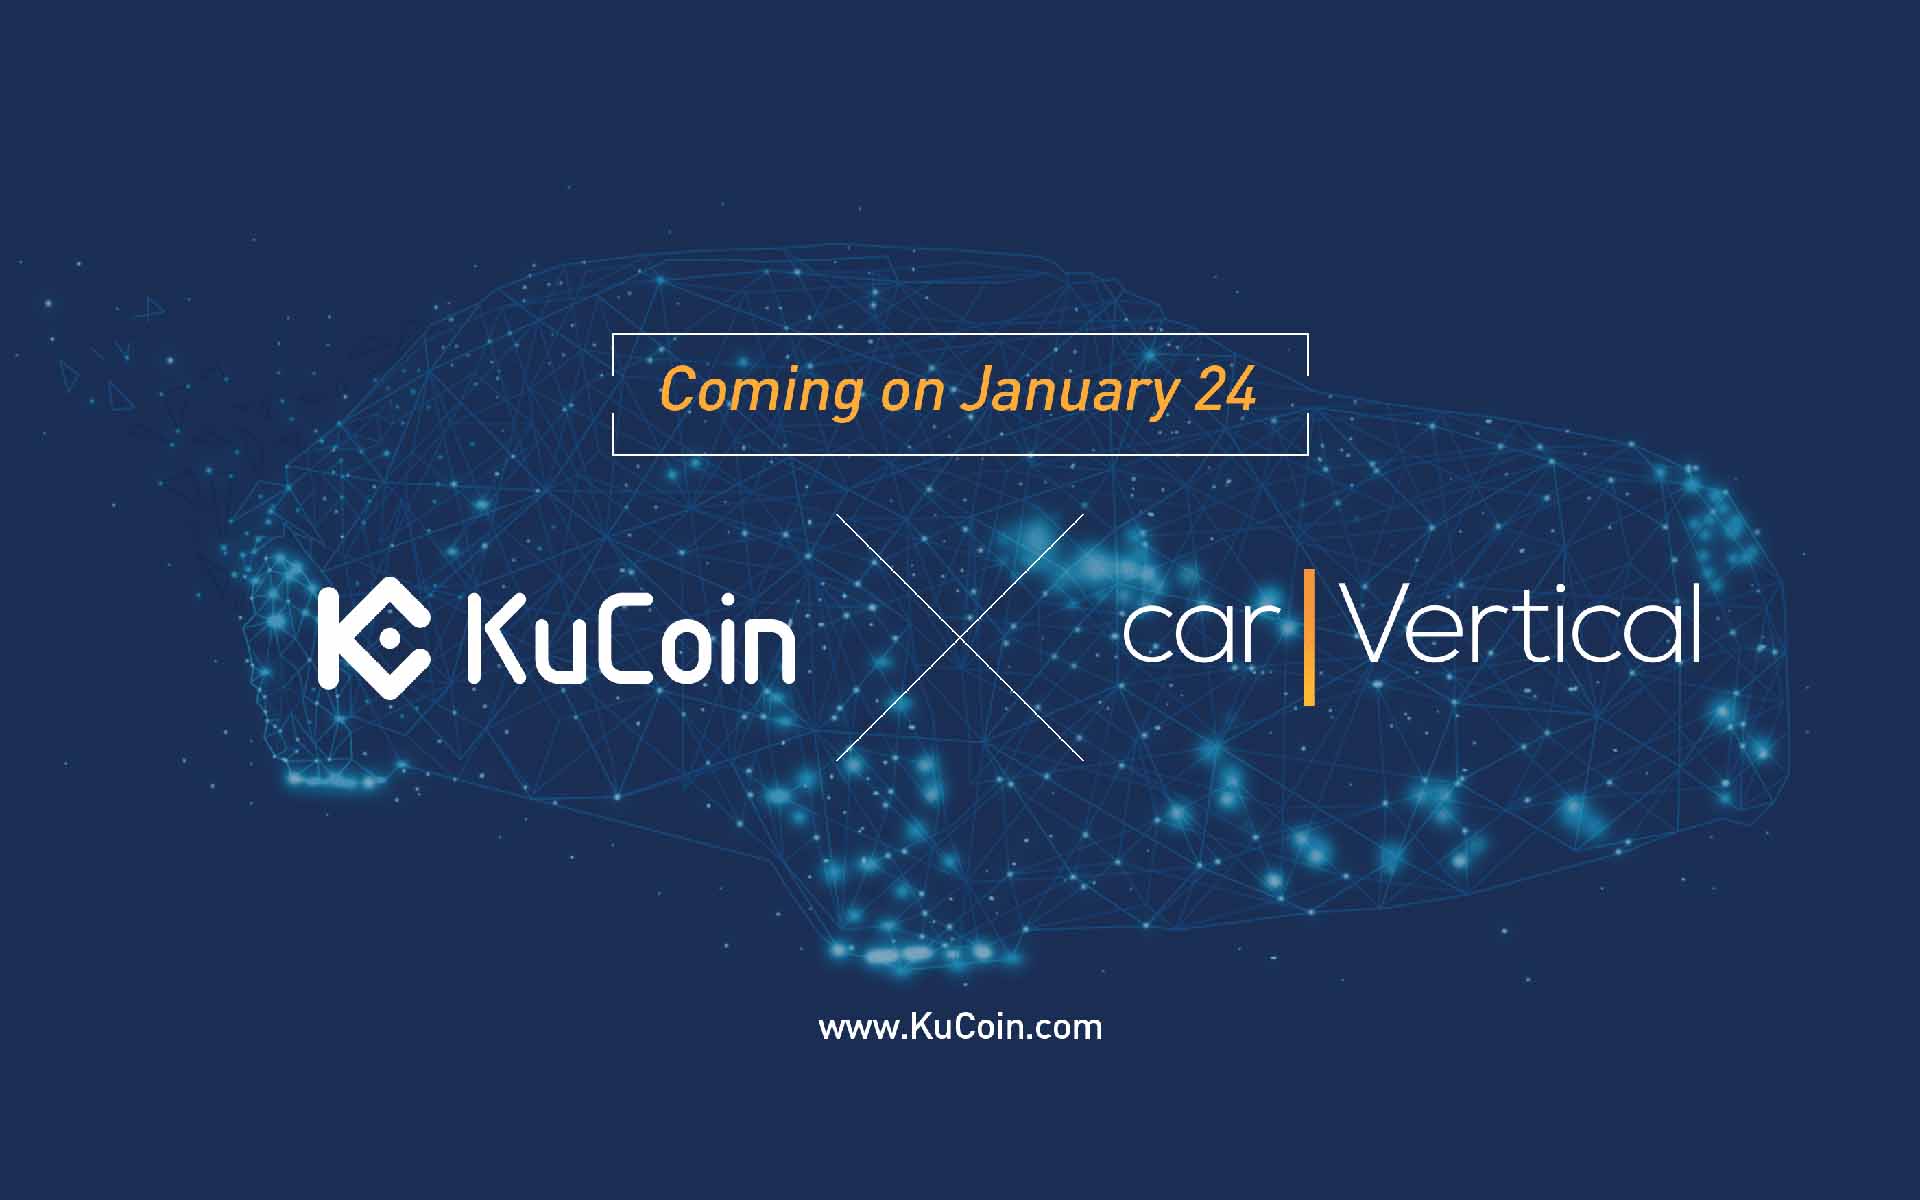 Tesla Model S As Prize For carVertical listing on KuCoin